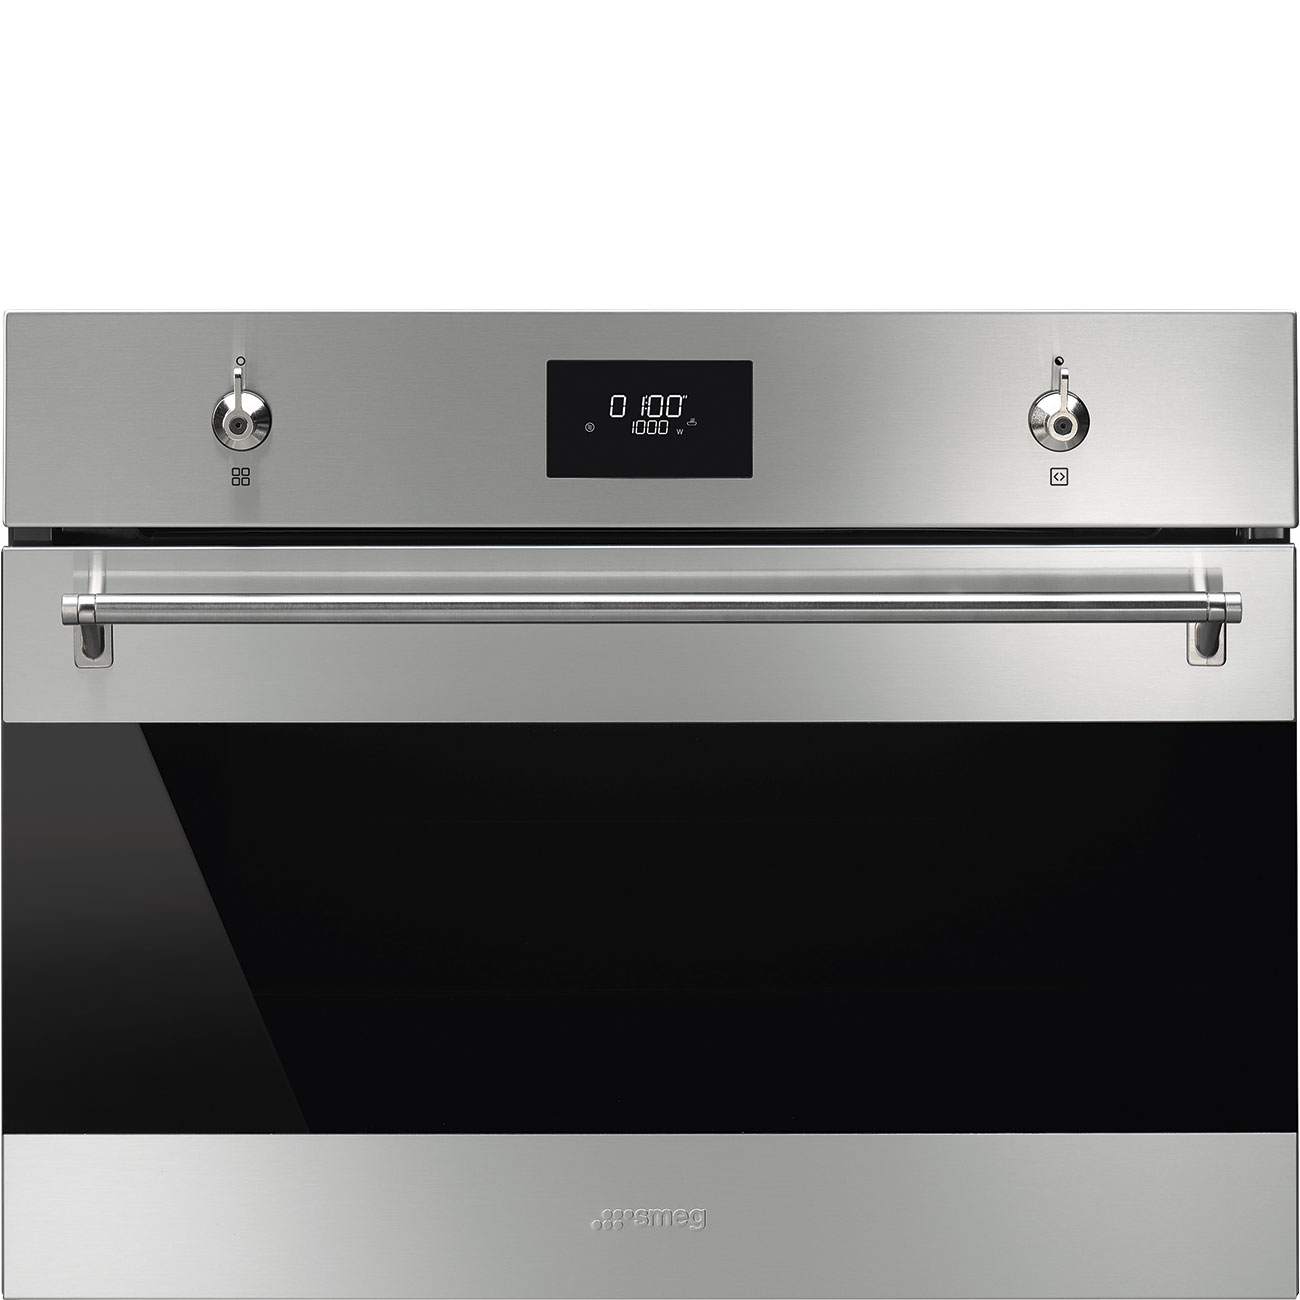 Stainless steel Micro combi Galileo Oven.  45cm compact. Built-in. Smeg_2